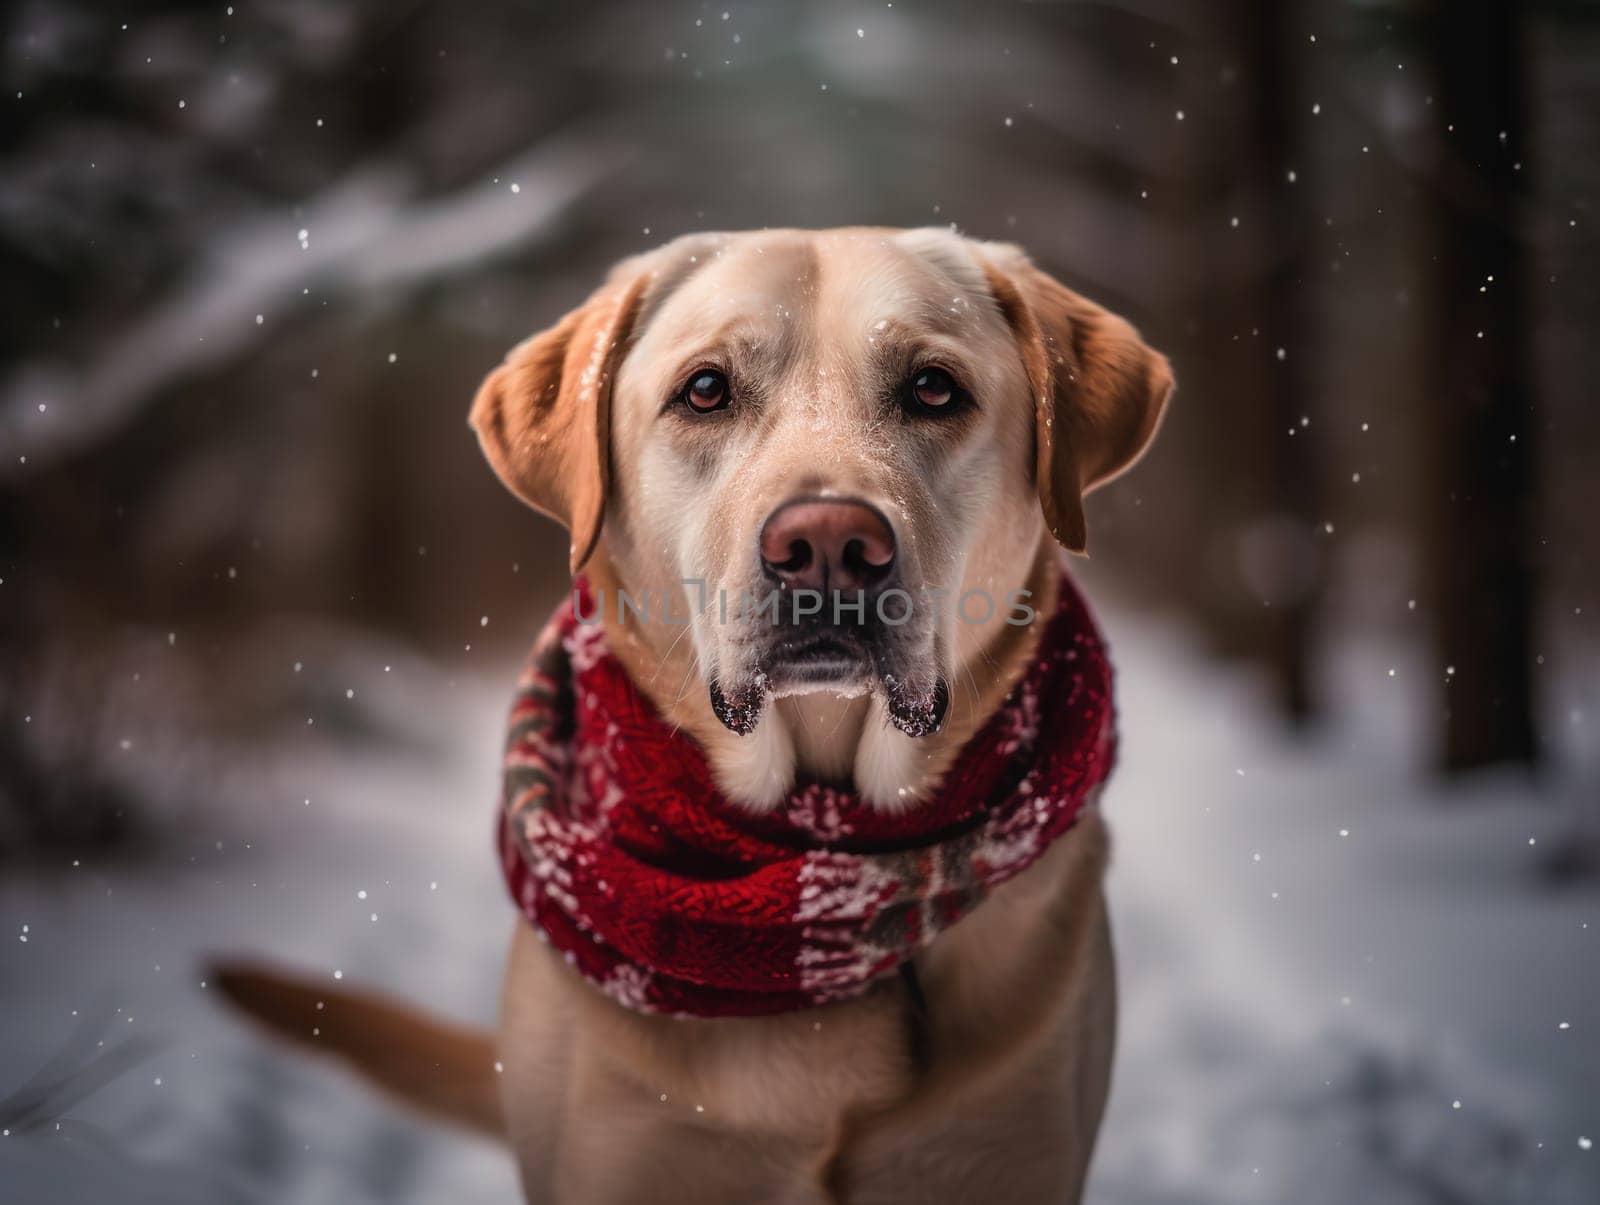 Cute Dog Sits In Winter Forest by GekaSkr